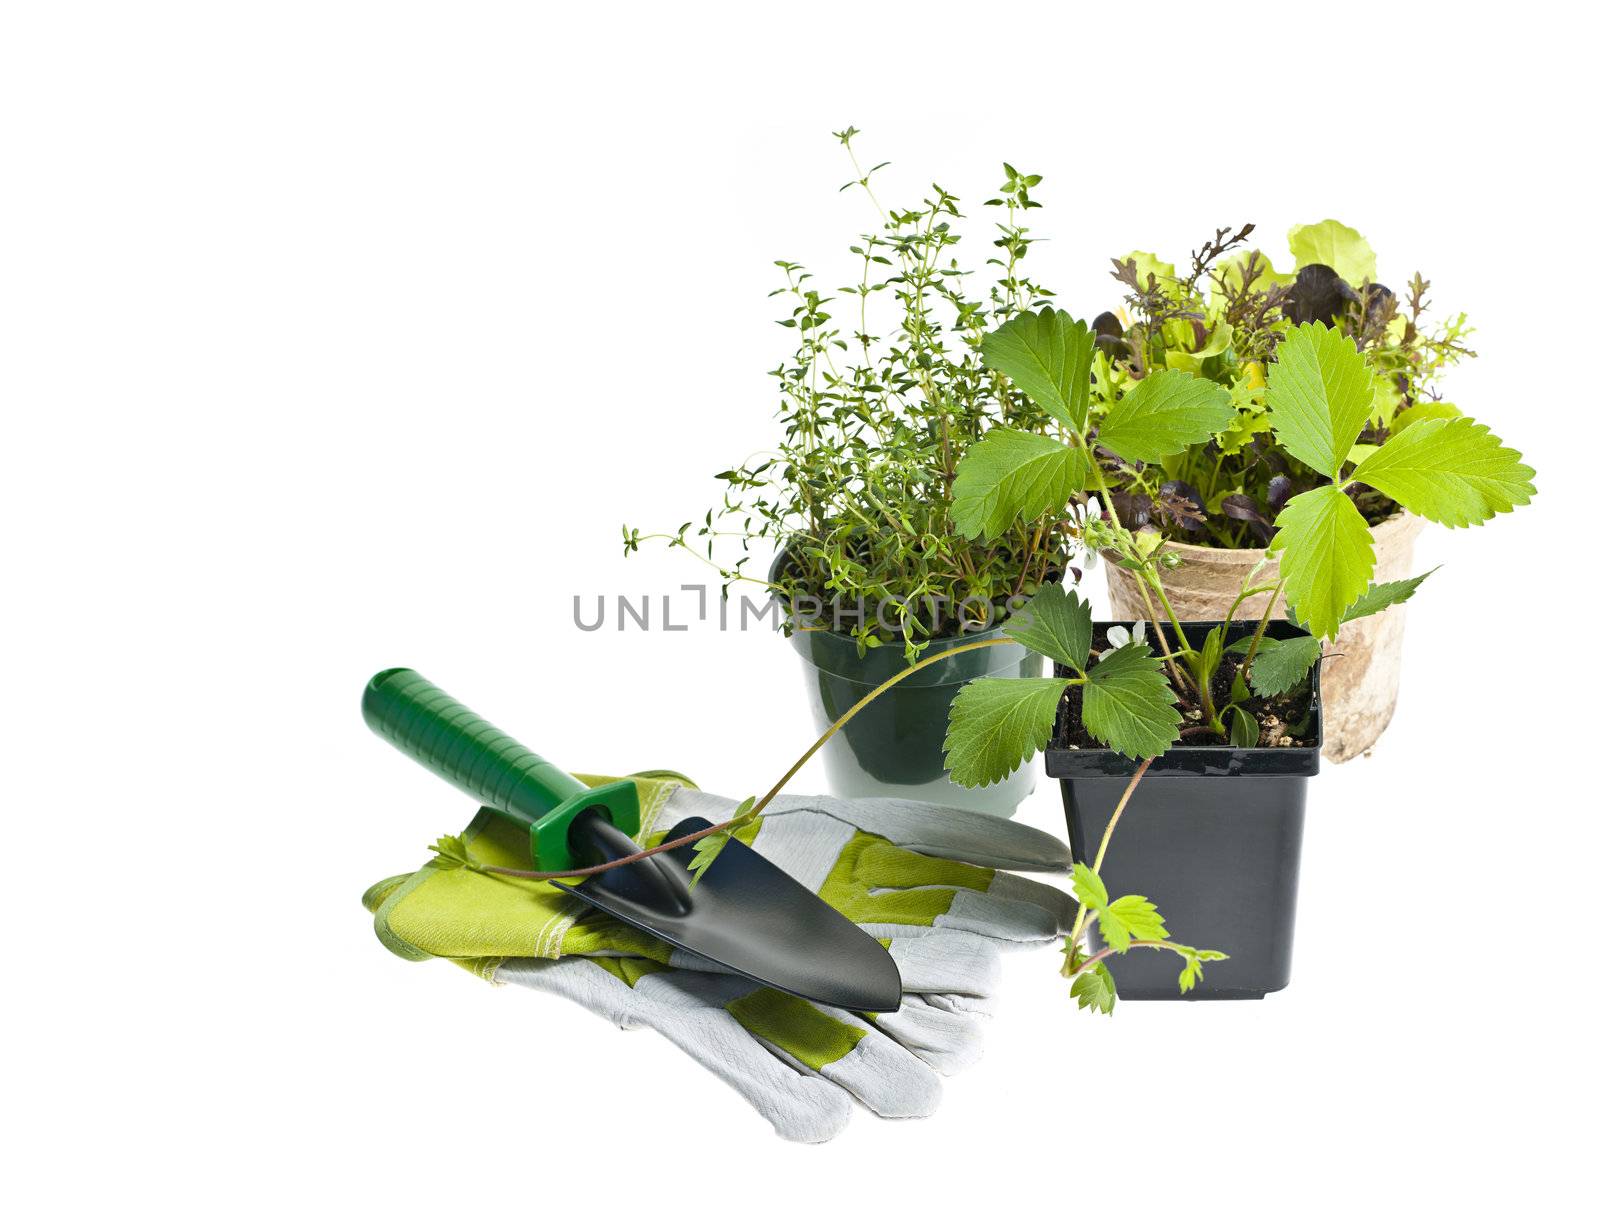 Gardening tools and plants by elenathewise